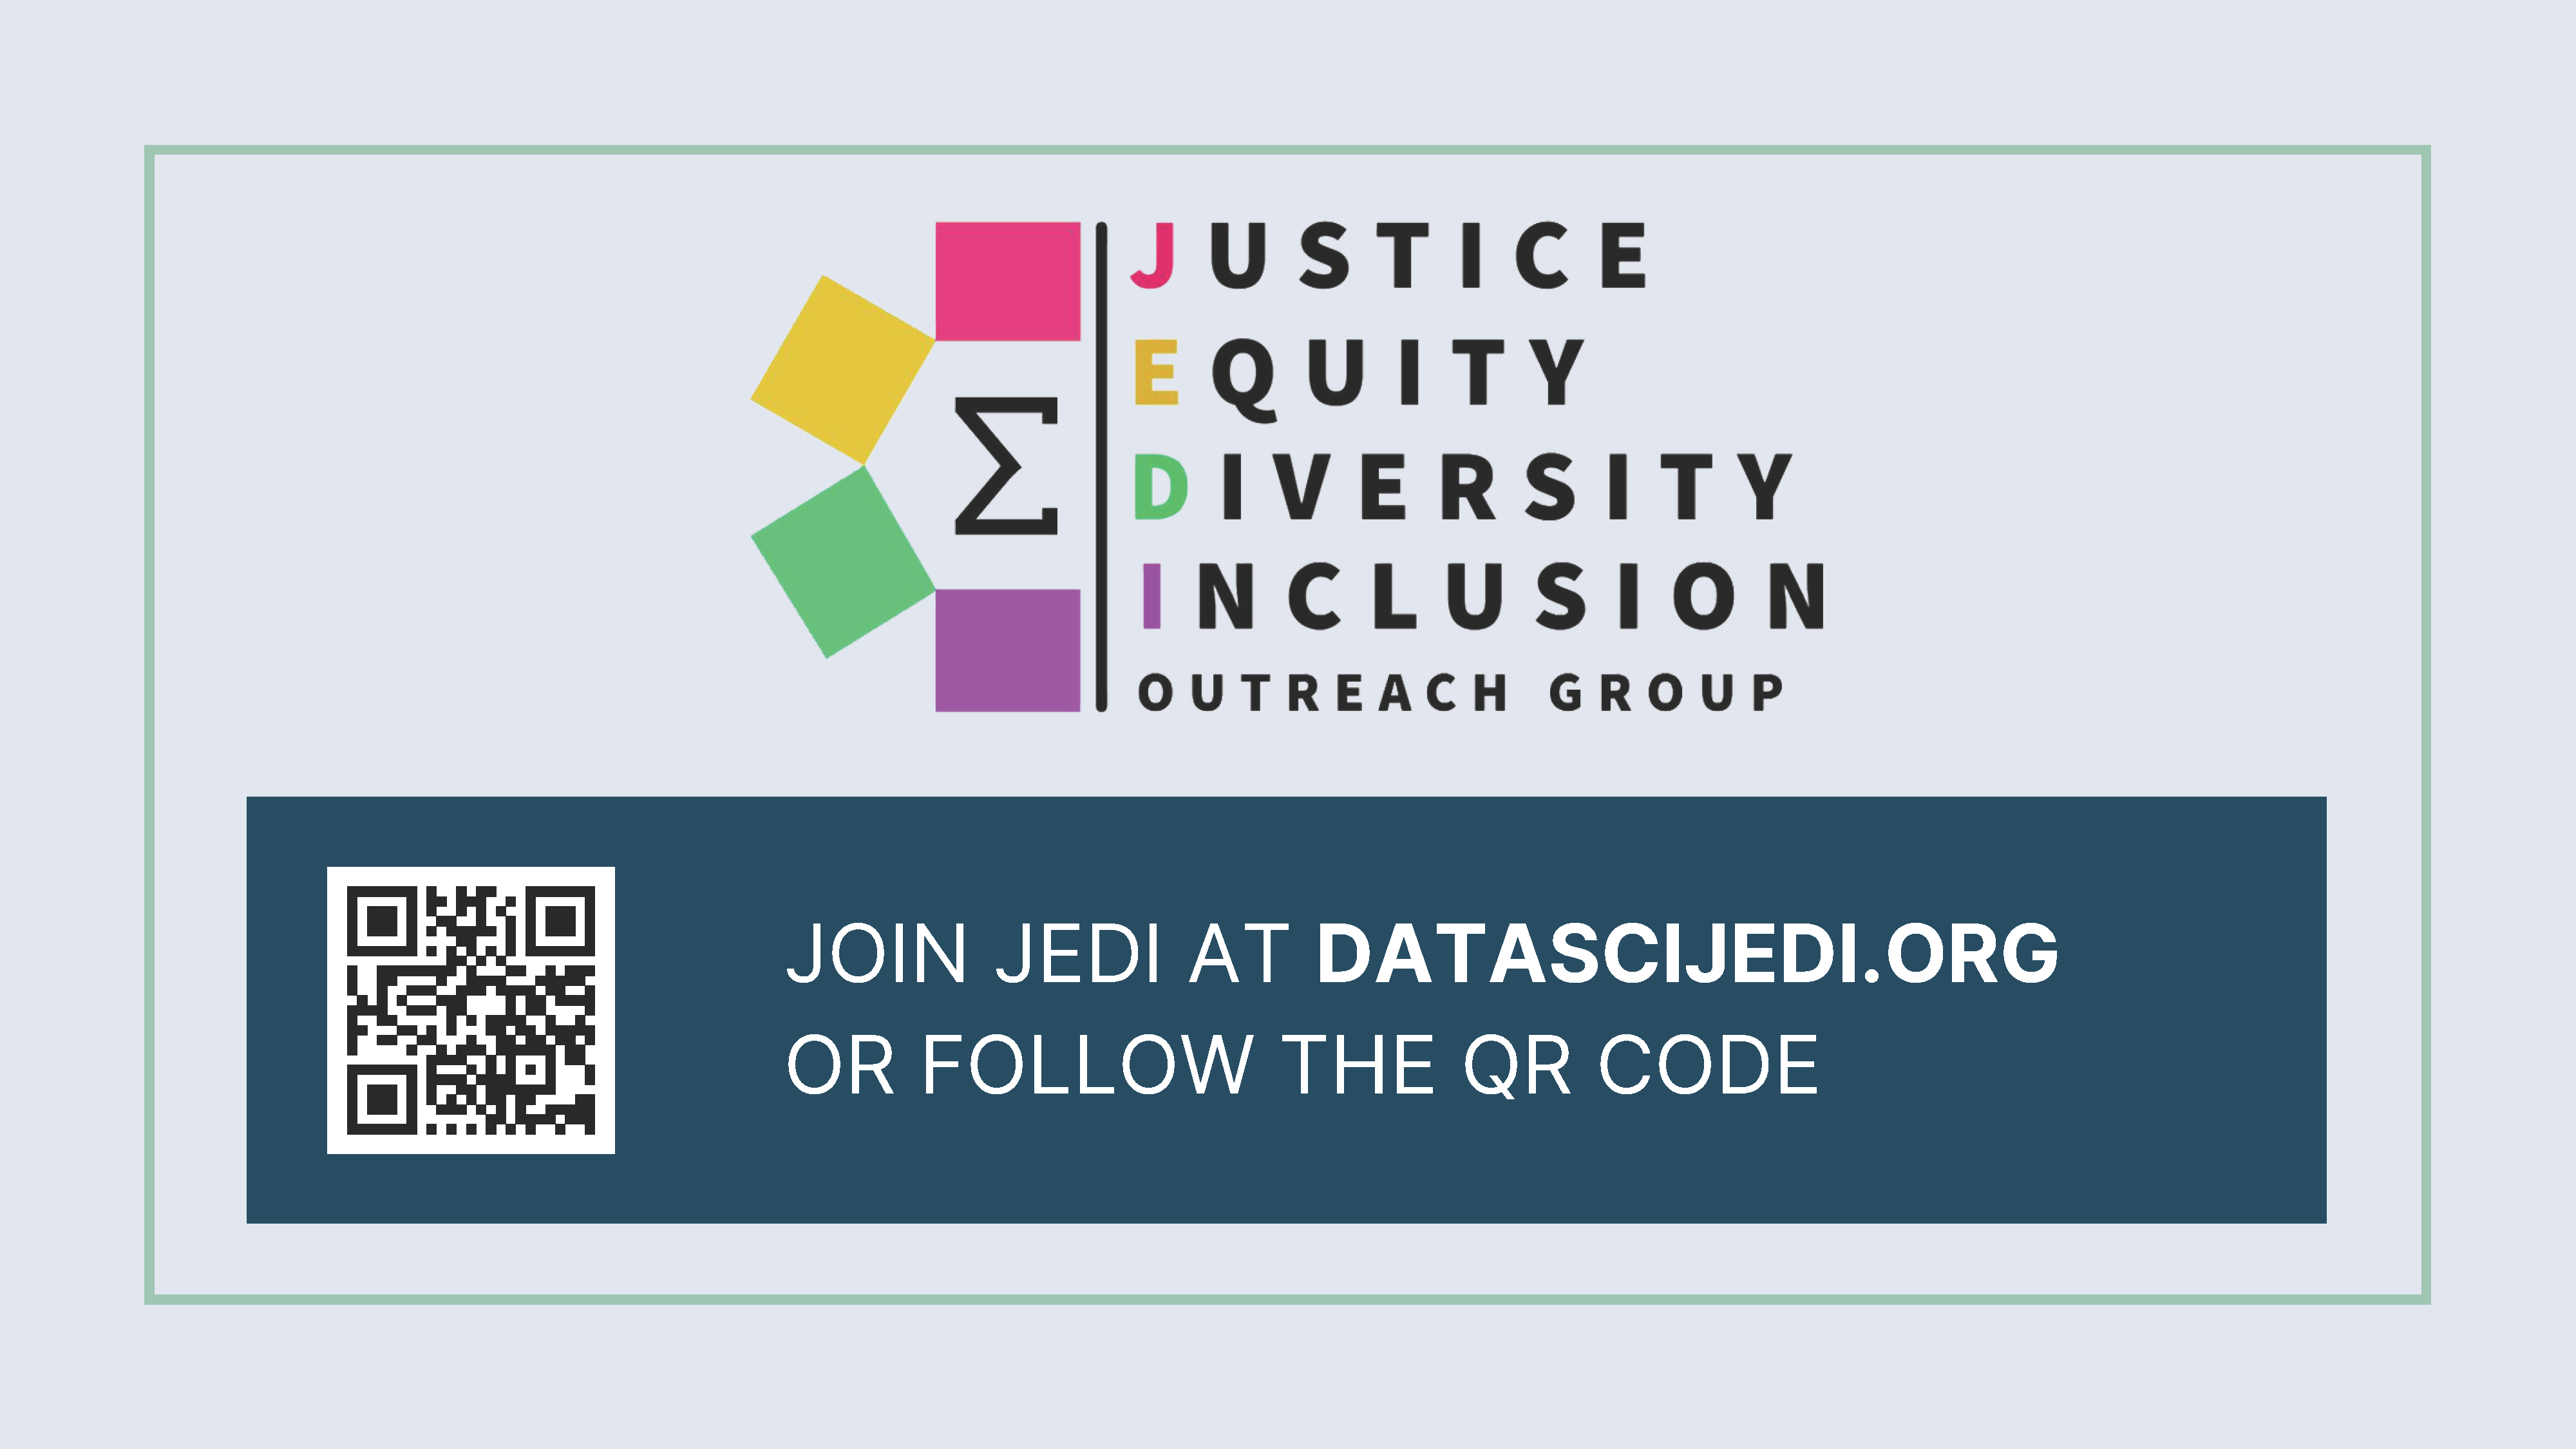 Image of slide for inclusion in presentations. Text reads: Join Jedi at DataSciJedi.org or follow the QR code